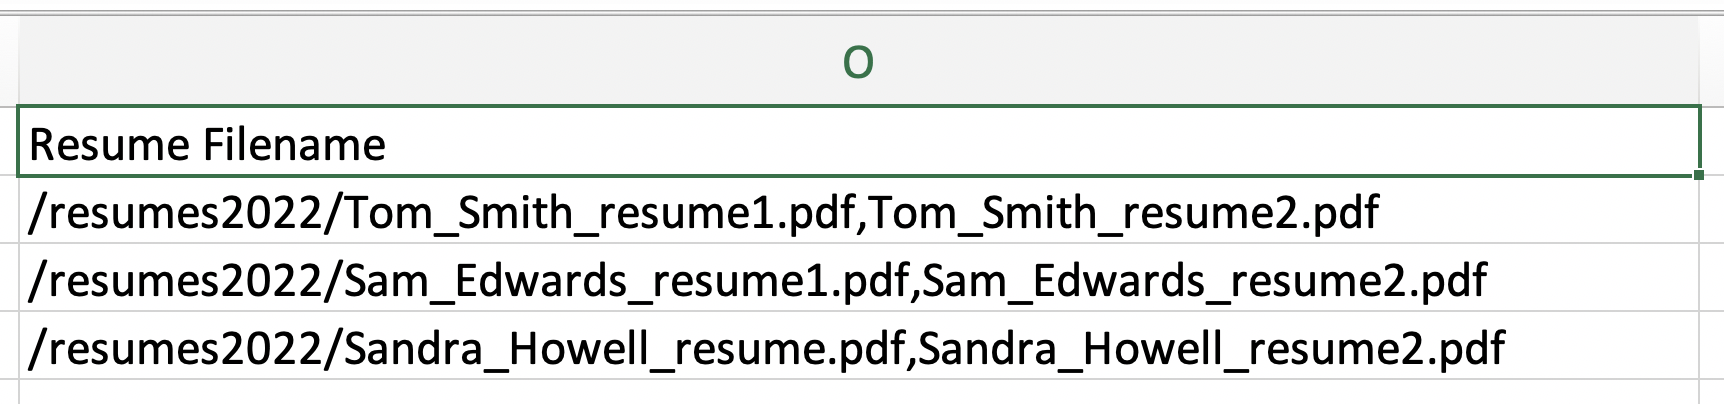 Close up of Resume filename column in bulk candidate import spreadsheet with multiple resumes for each candidate.